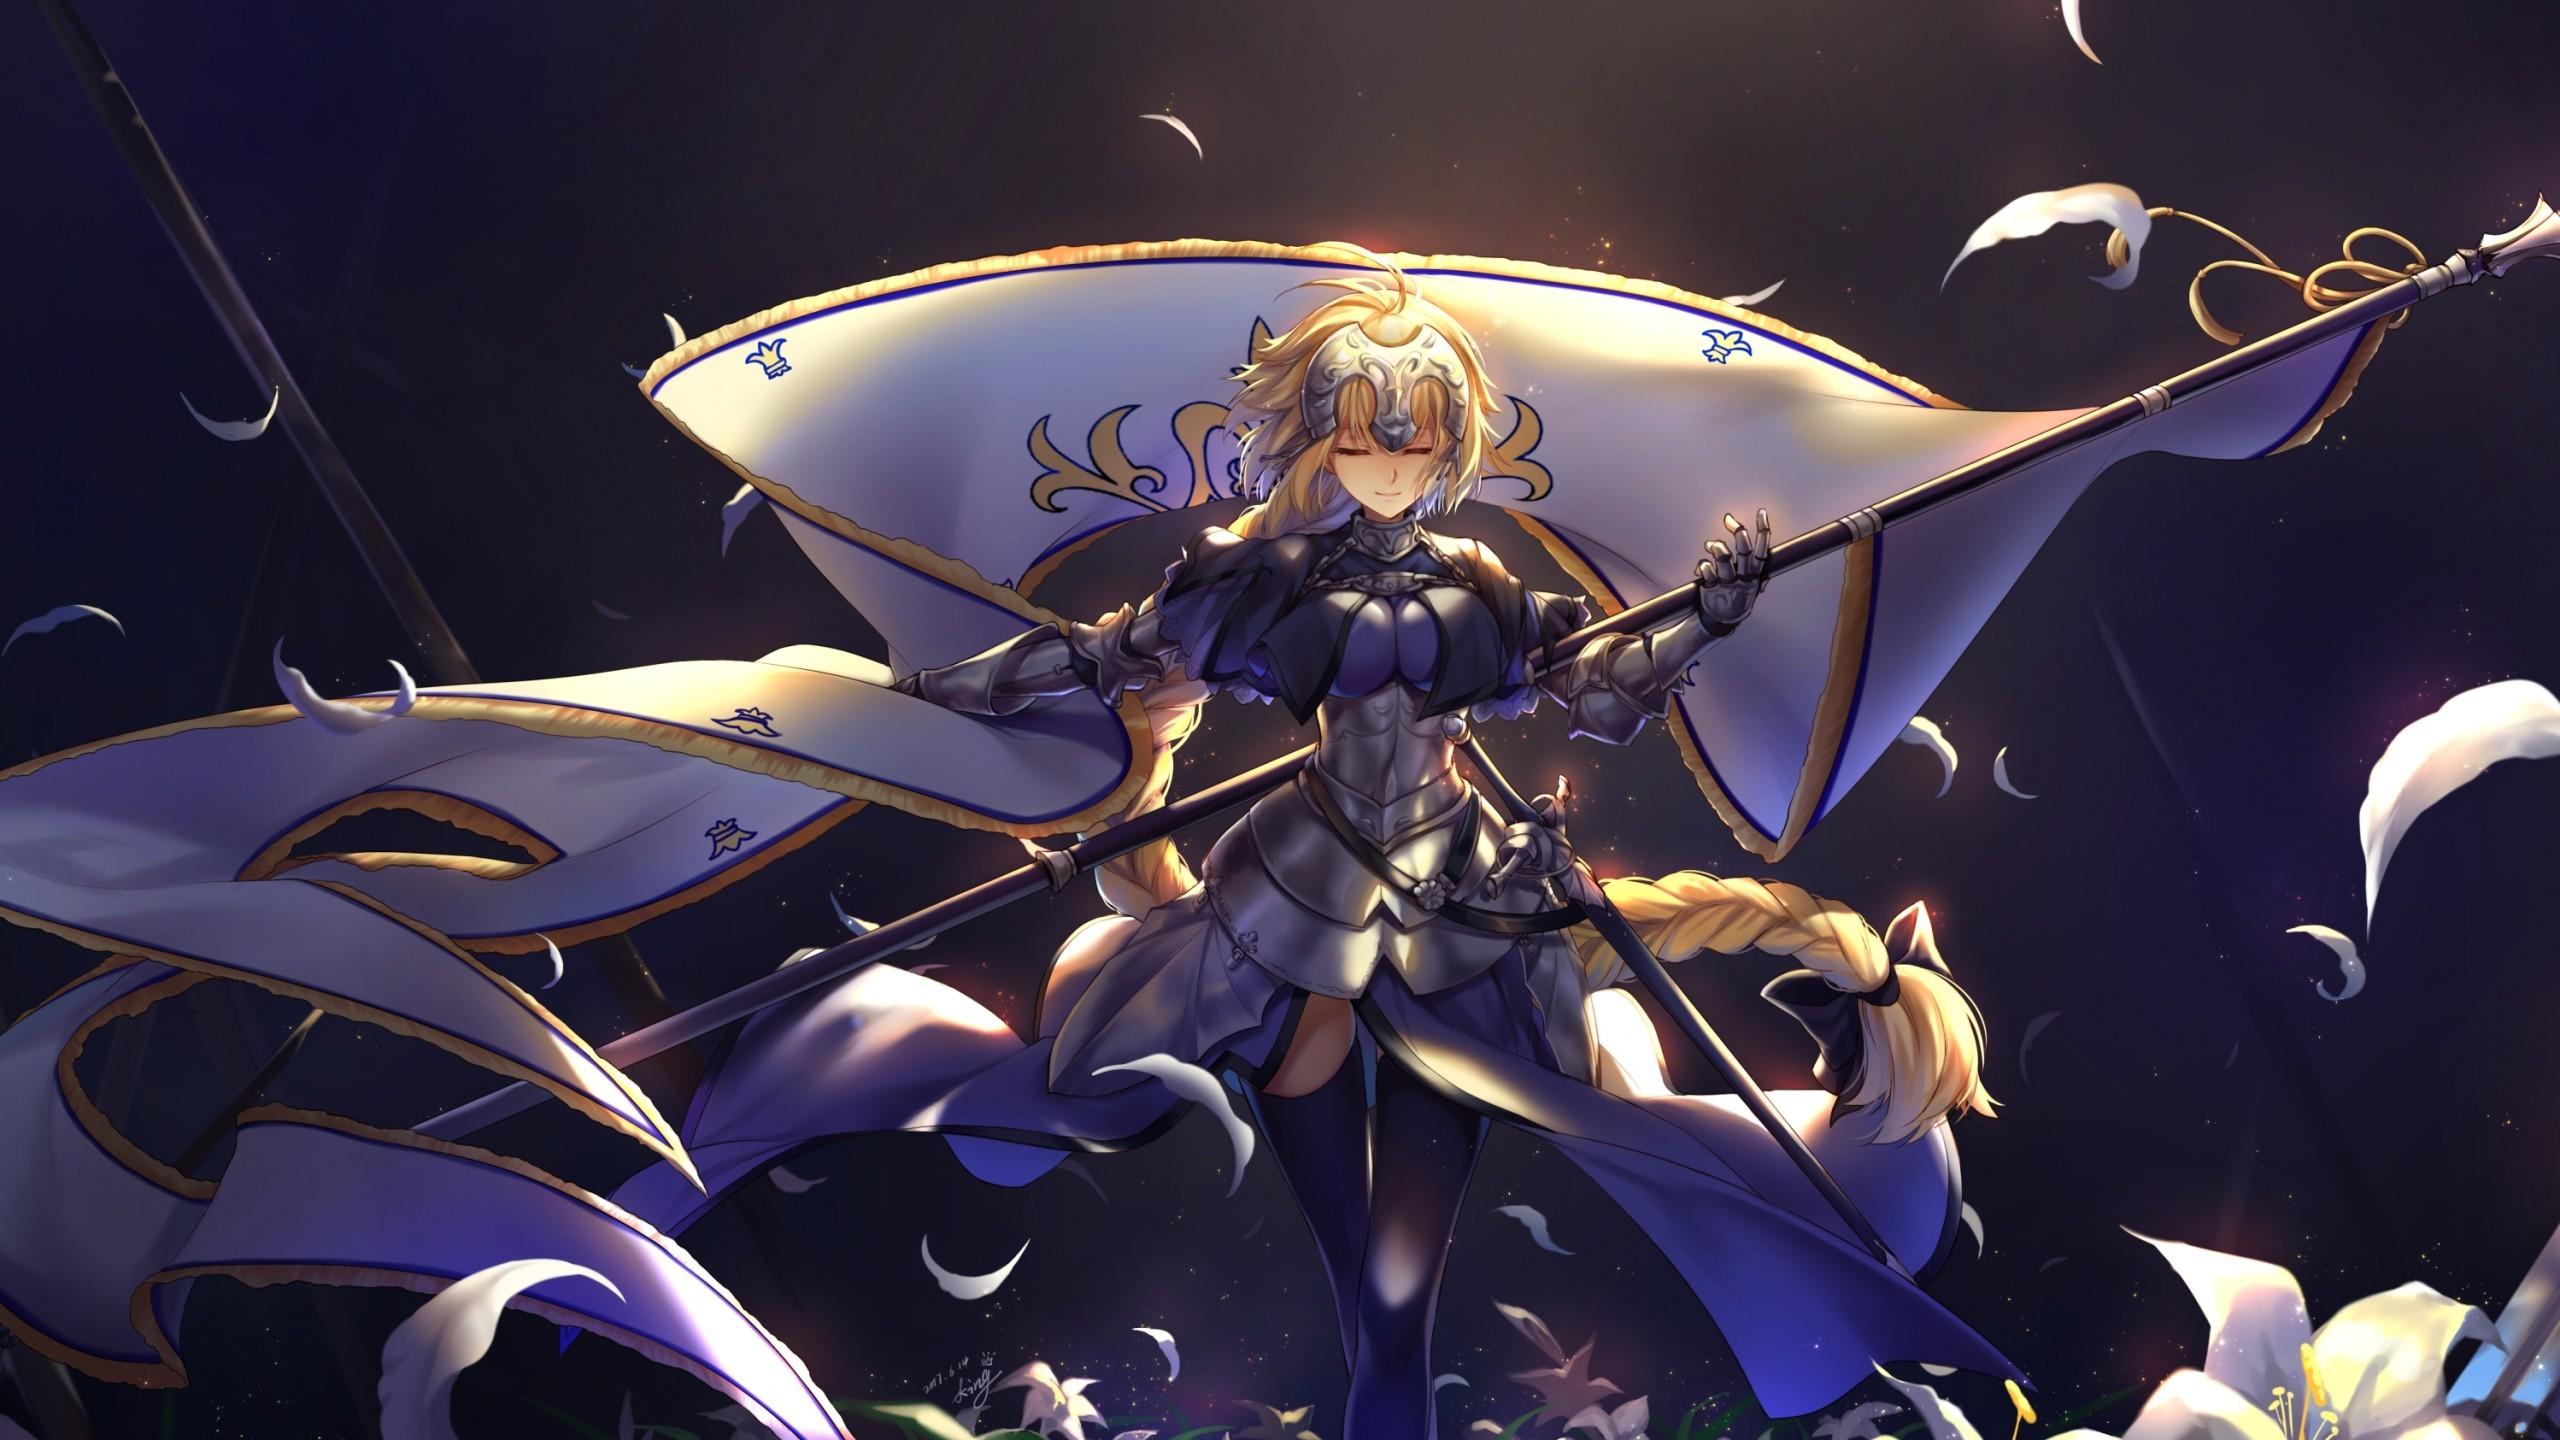 Download 2560x1440 Jeanne D'arc, Fate Apocrypha, Fate Grand Order